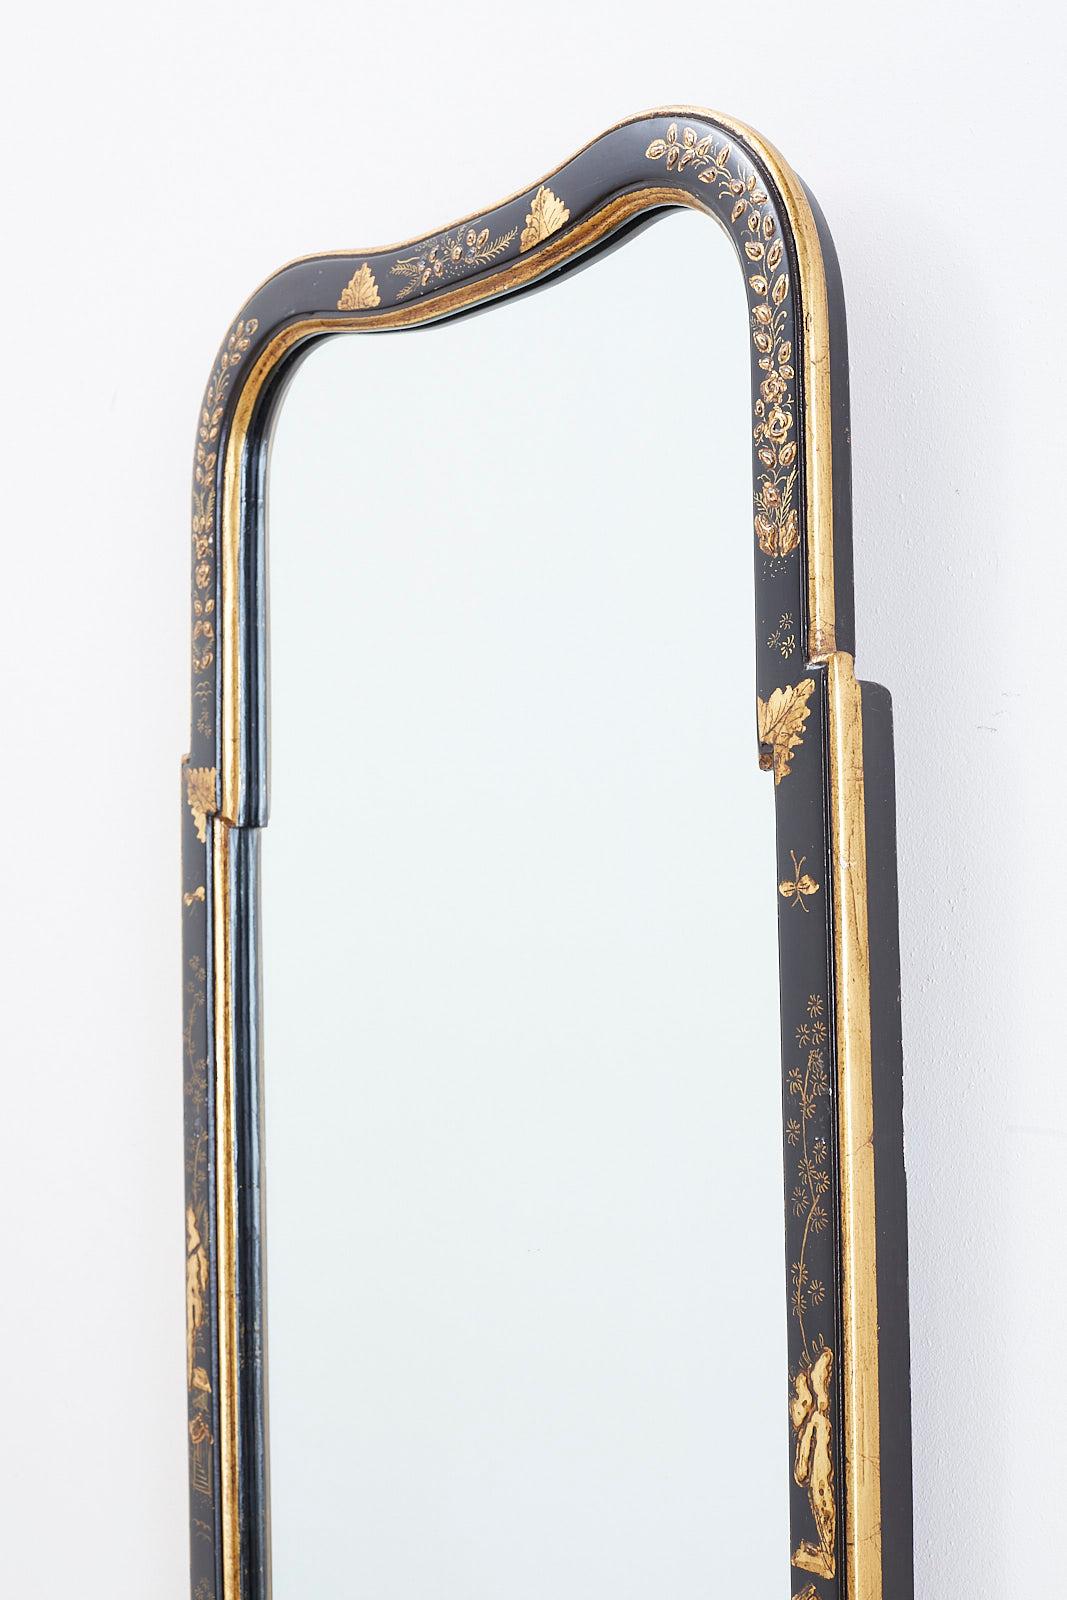 American Pair of Chinoiserie Queen Anne Style Parcel-Gilt Mirrors